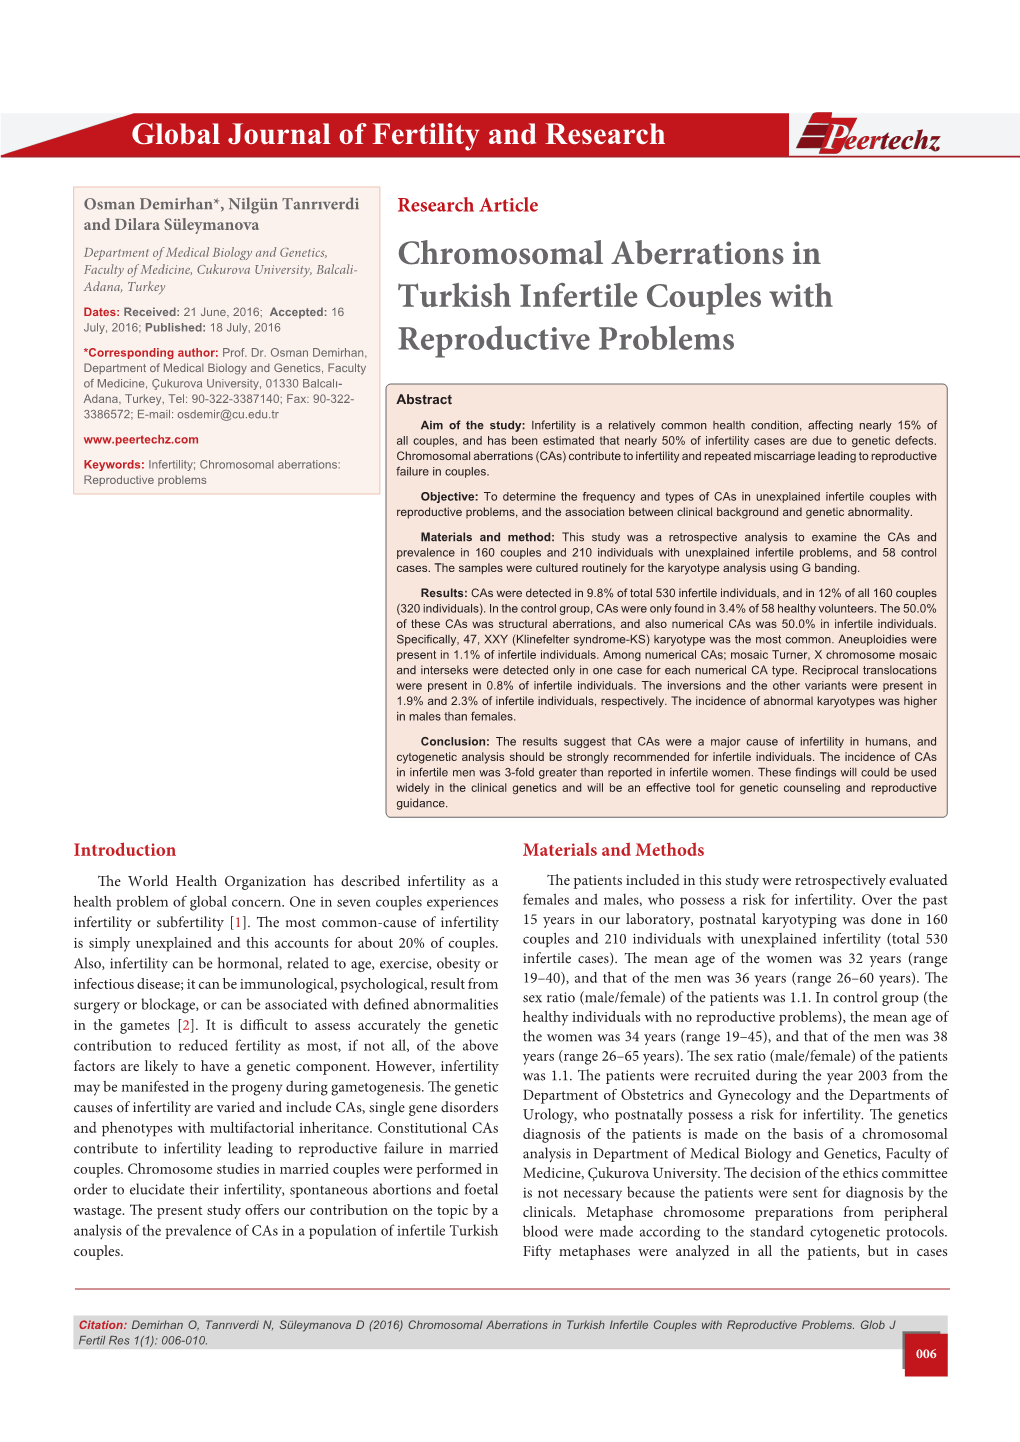 Chromosomal Aberrations in Turkish Infertile Couples with Reproductive Problems